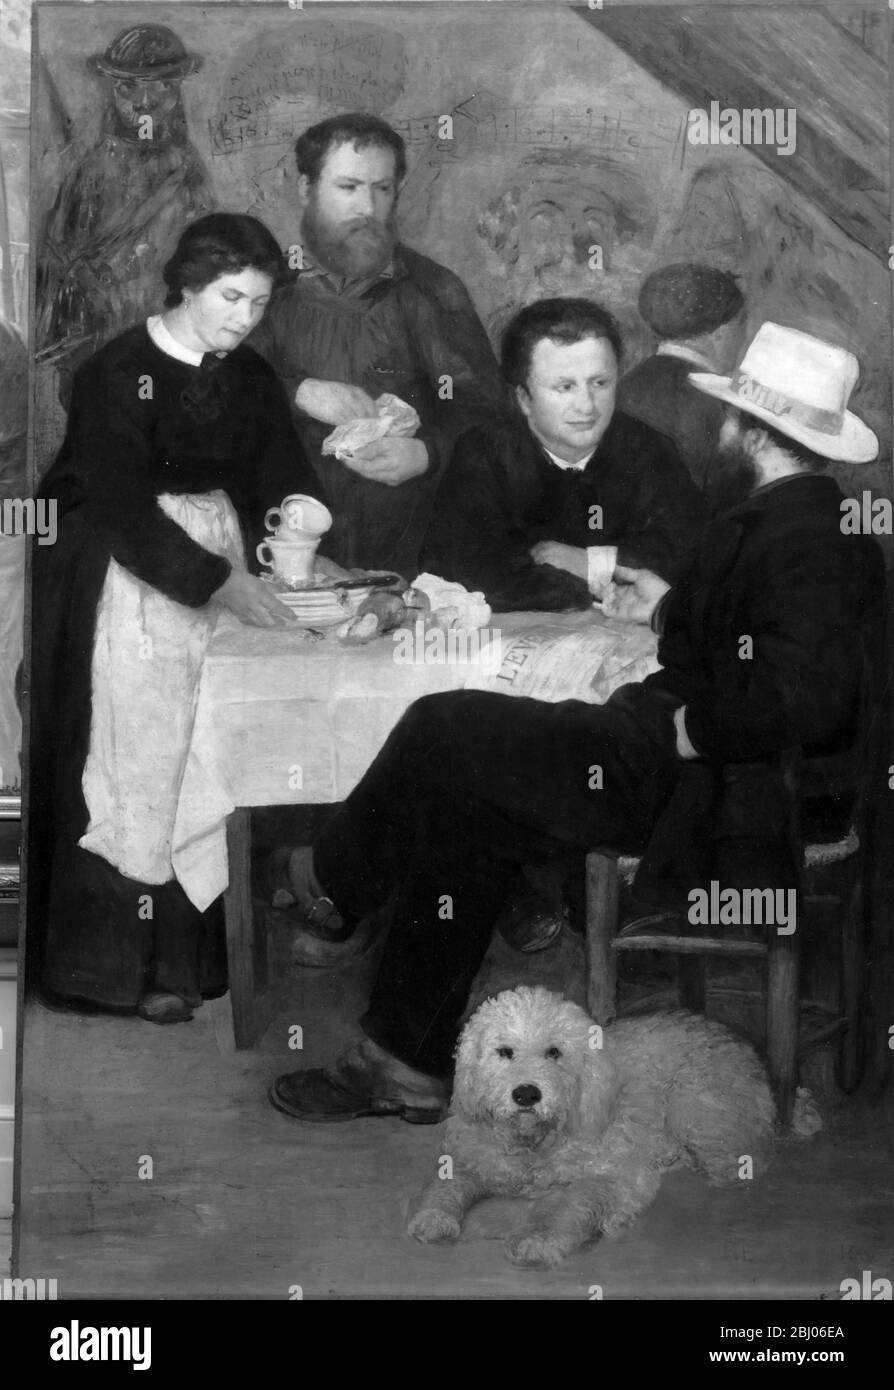 Renoir: At the Inn of Mother Anthony Marlotte 1866 - Left to right: Nana, the painter Lecoeur, an unknown man, Mother Anthony, Sisley. Infront Lecoeur's white poodle. Marlotte is near the forest of Fontainbleu Stock Photo